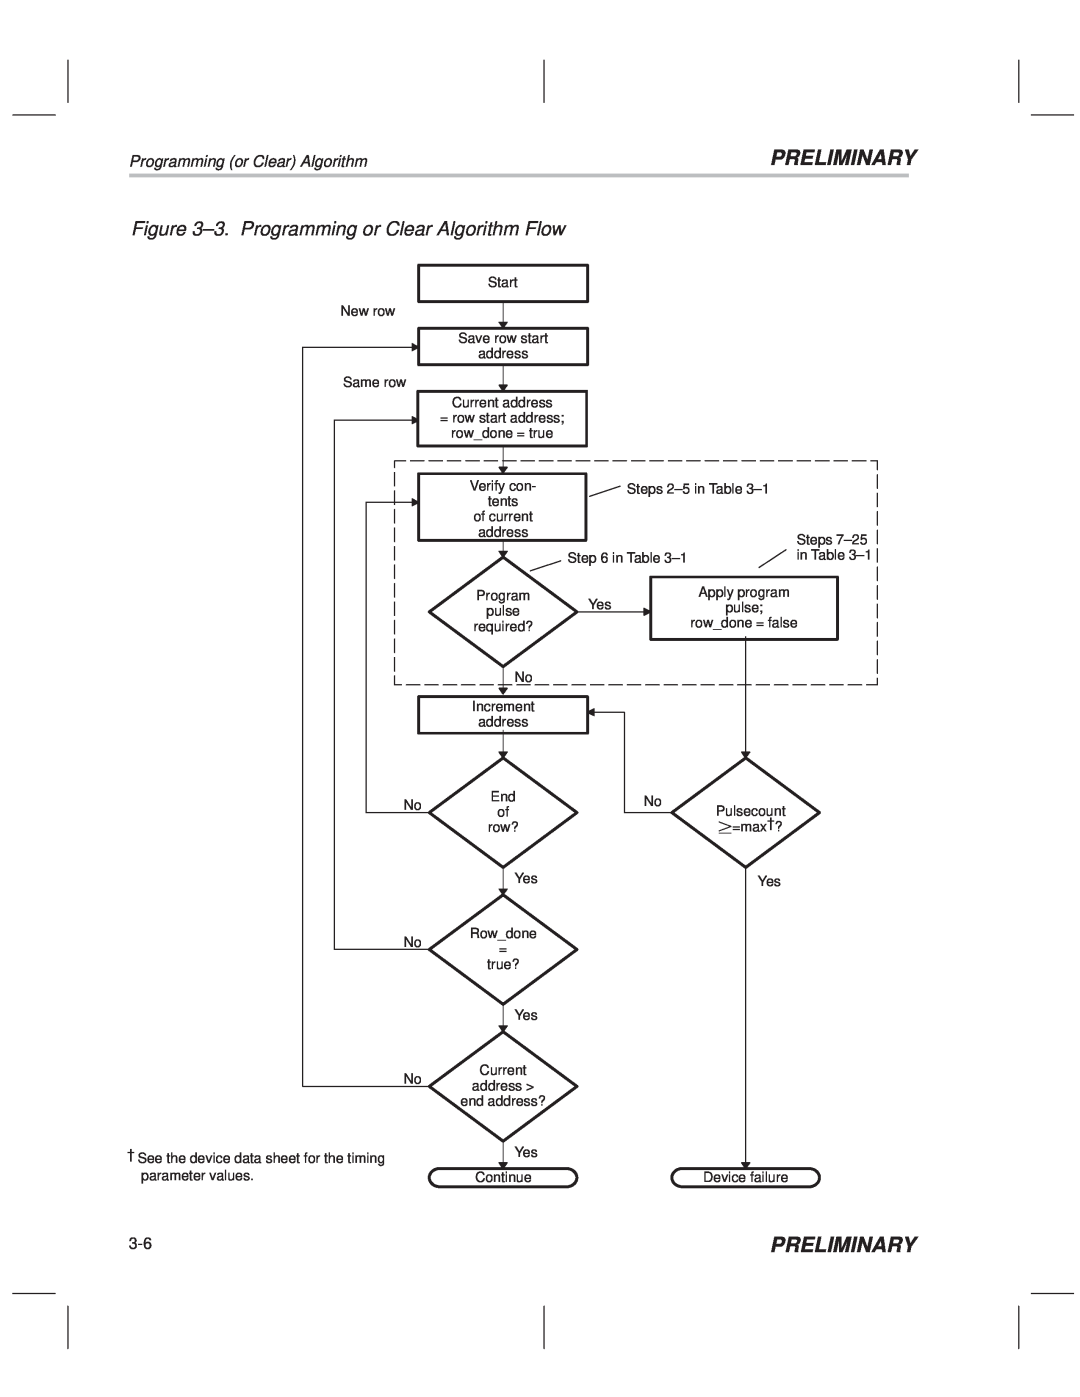 Texas Instruments TMS320F20x/F24x DSP manual ±3. Programming or Clear Algorithm Flow, Preliminary 